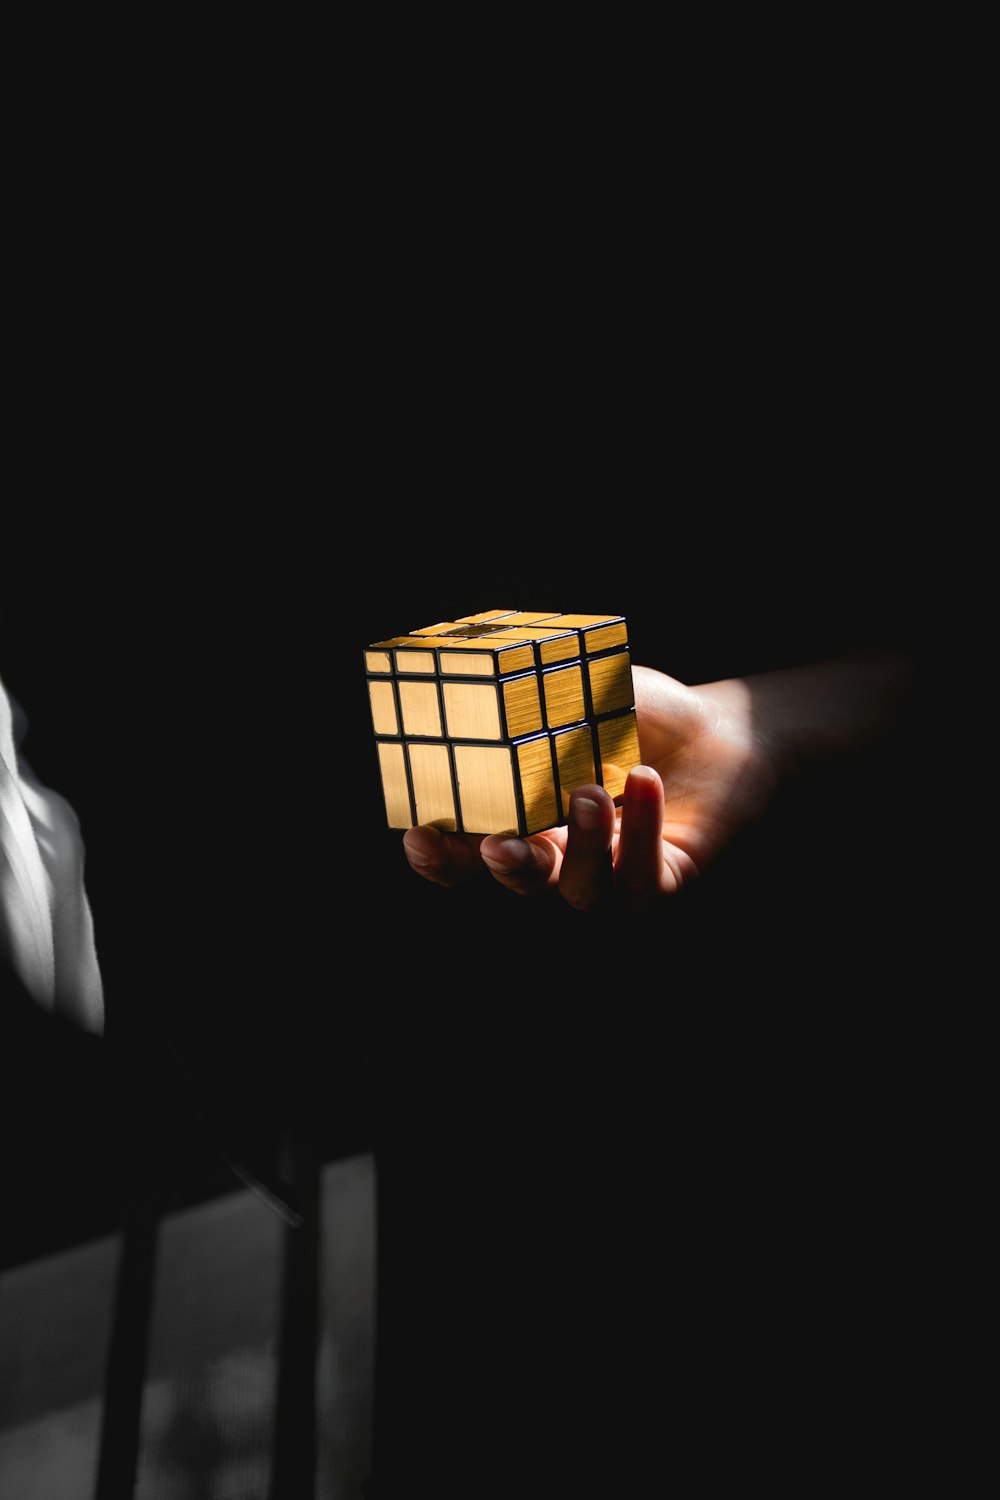 person holding 3 x 3 rubiks cube